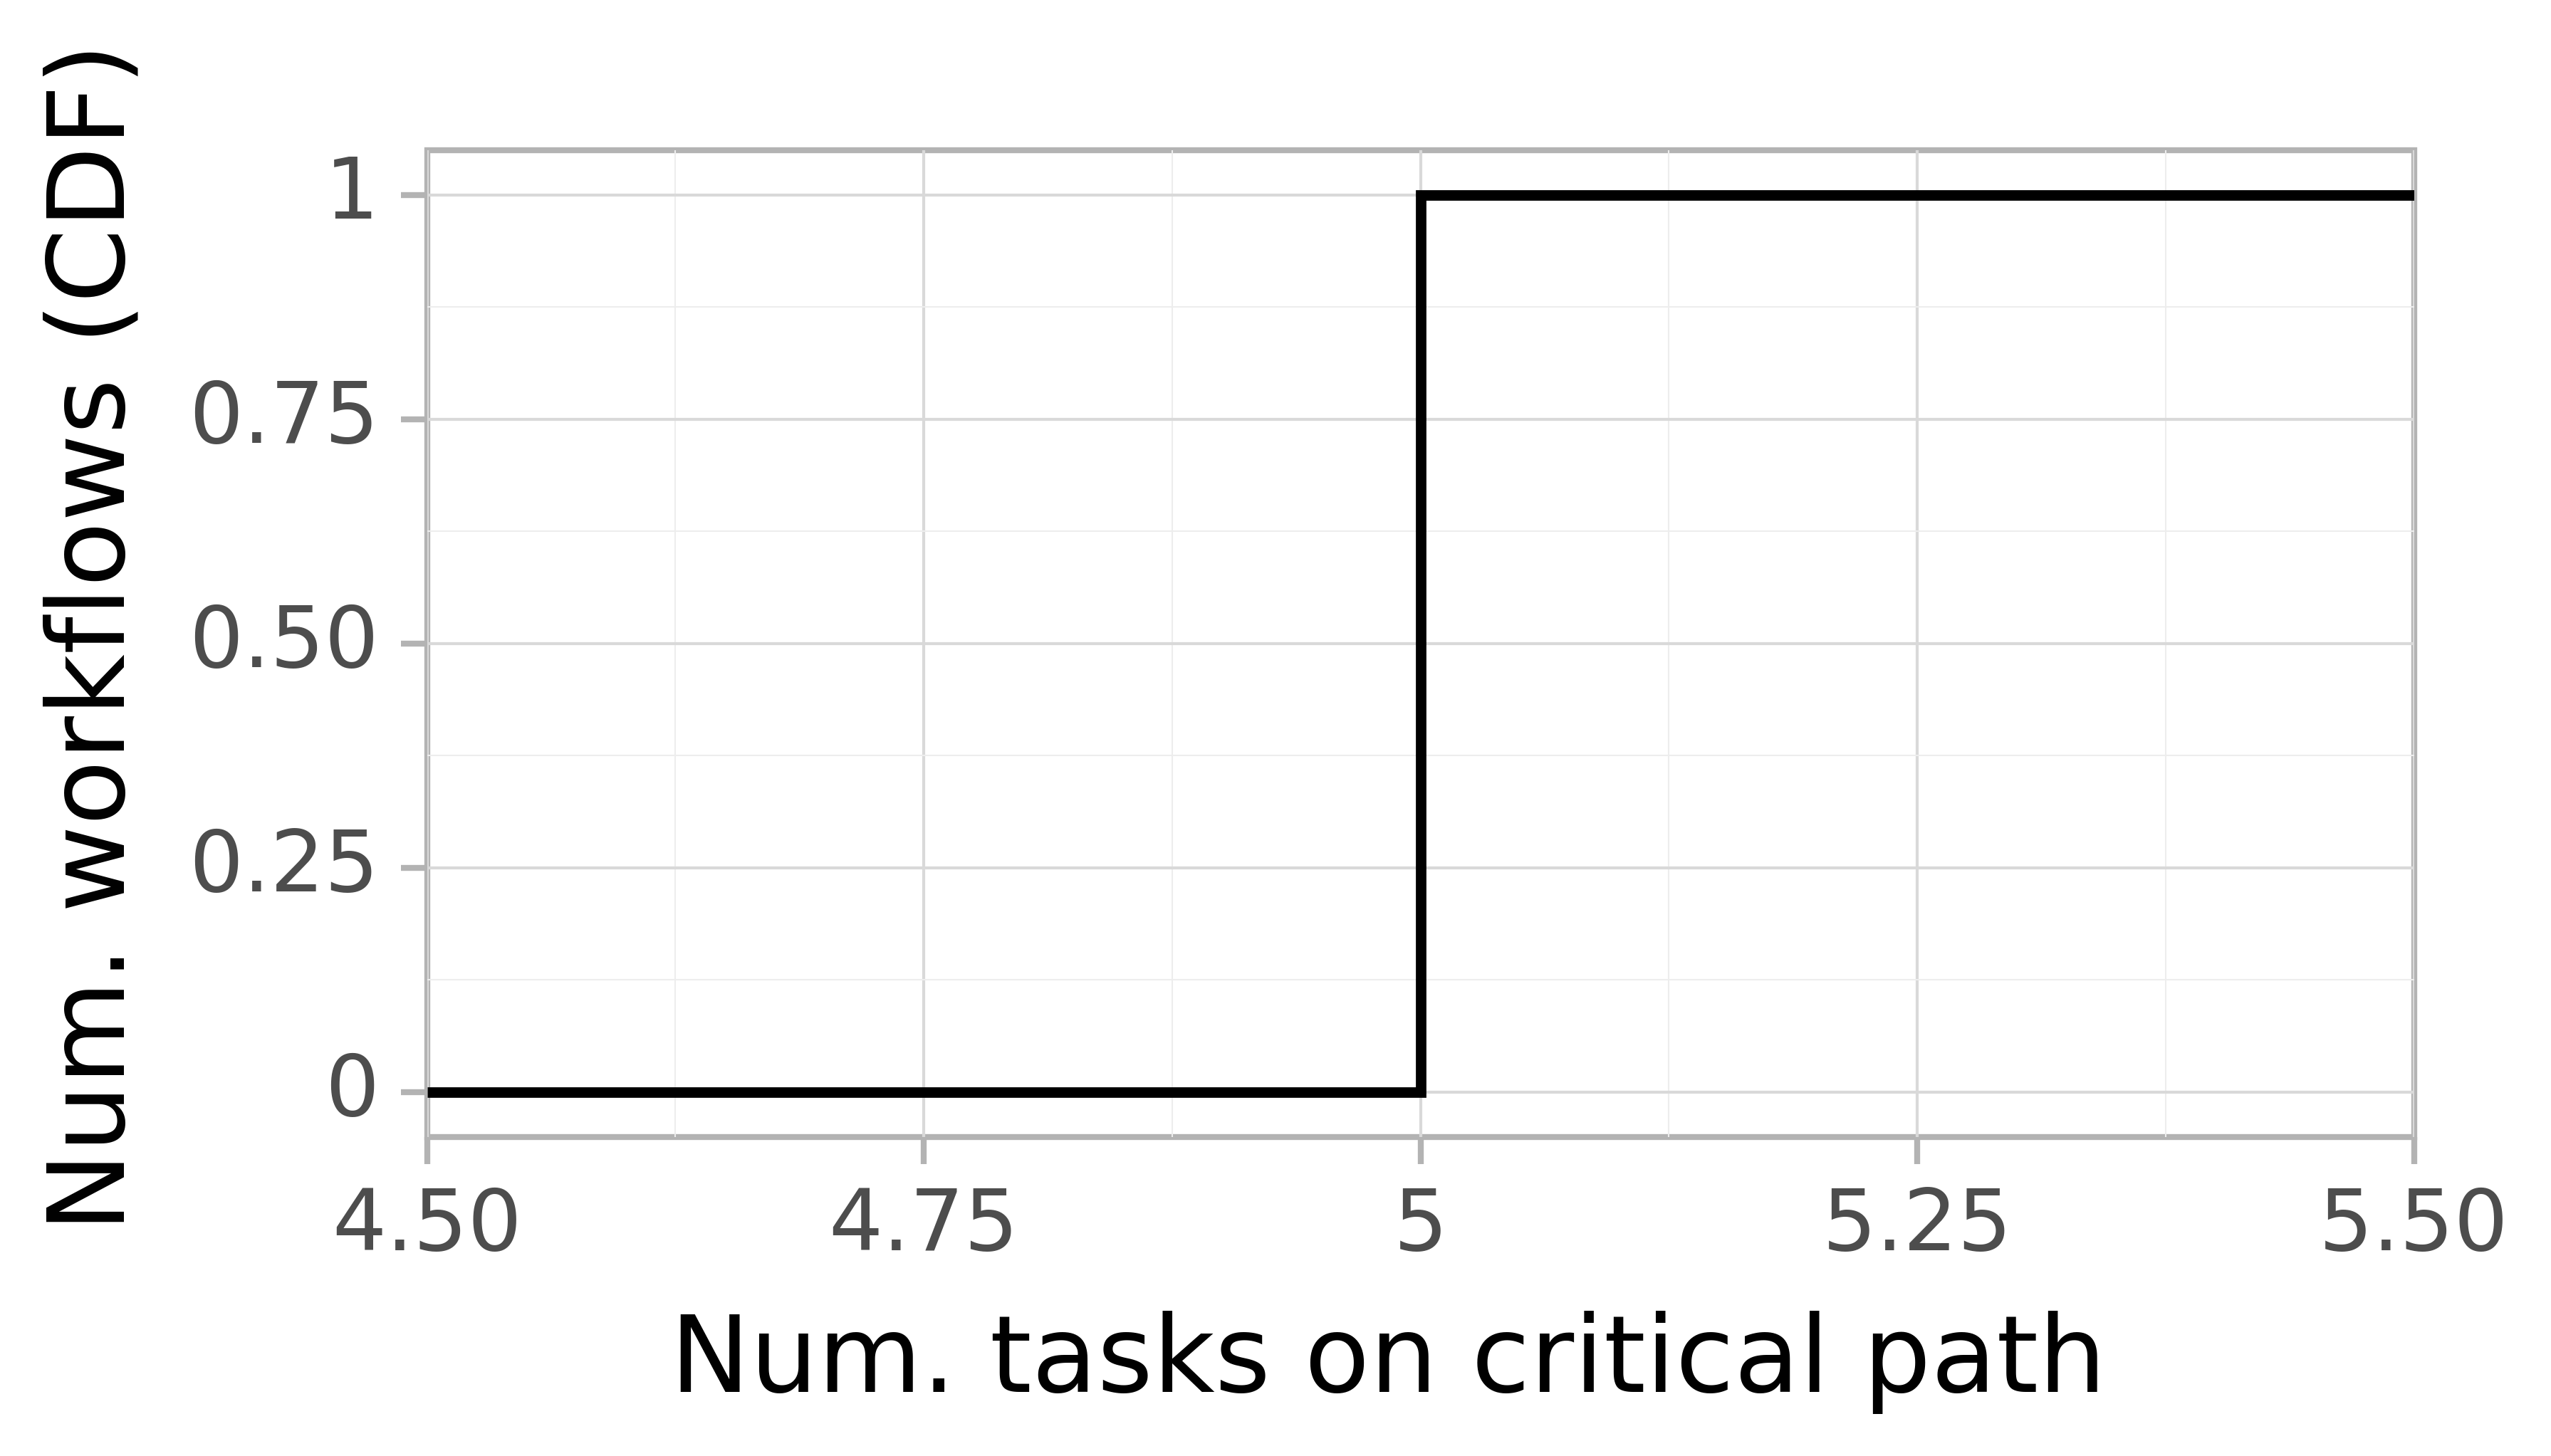 Job critical path task count graph for the askalon-new_ee40 trace.